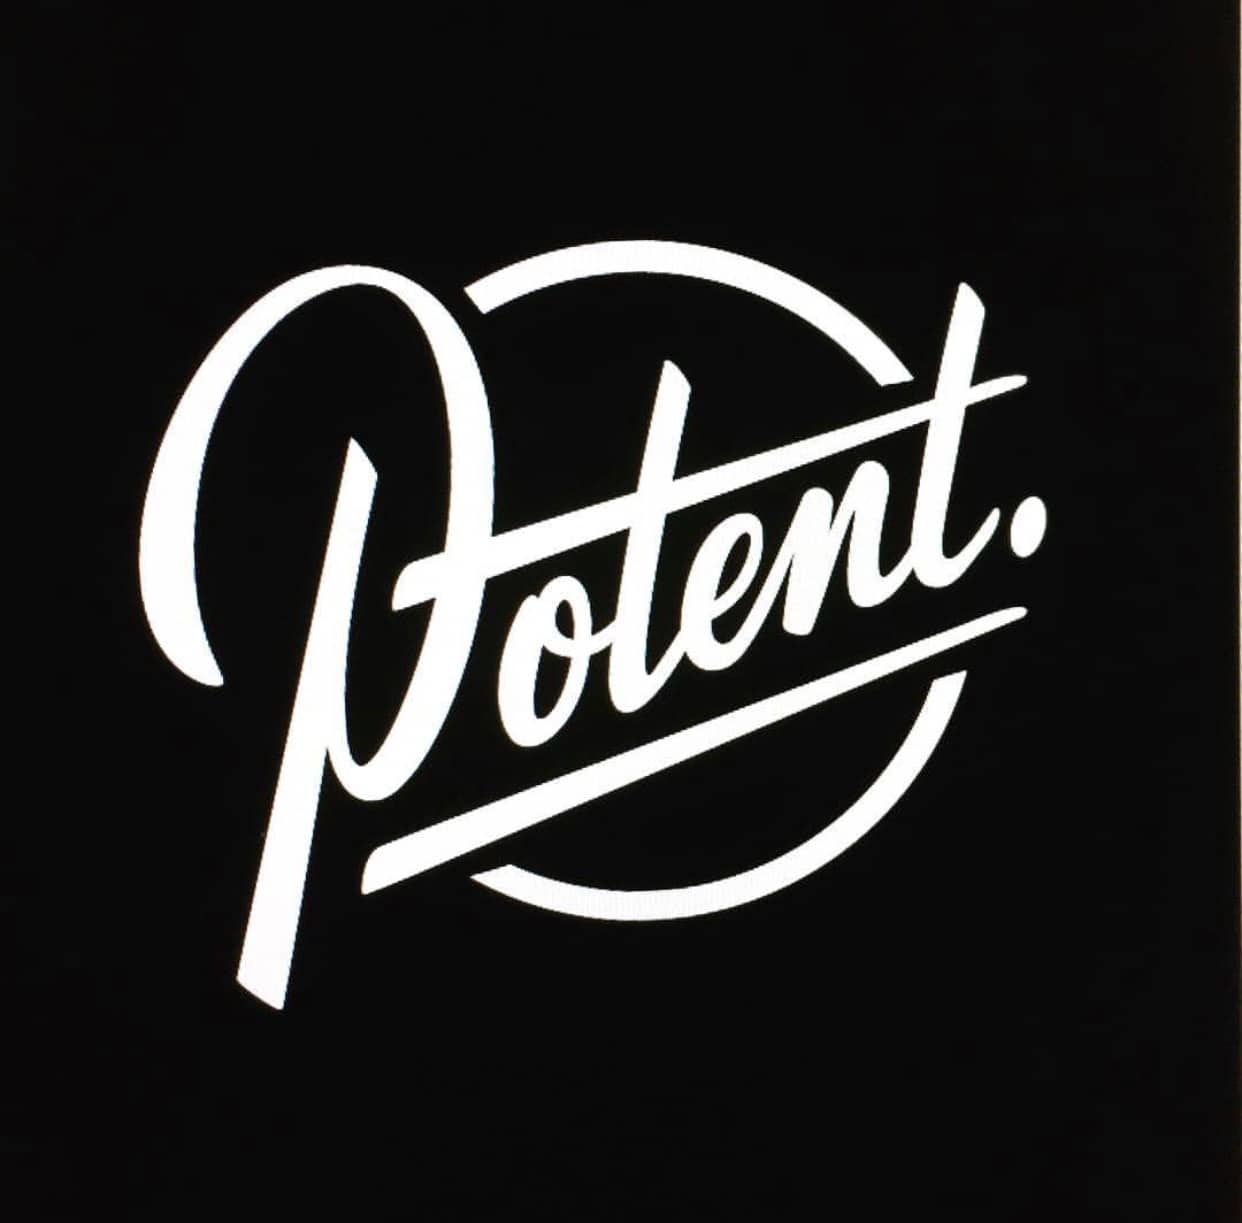 Potent. Branding design and lettering examples